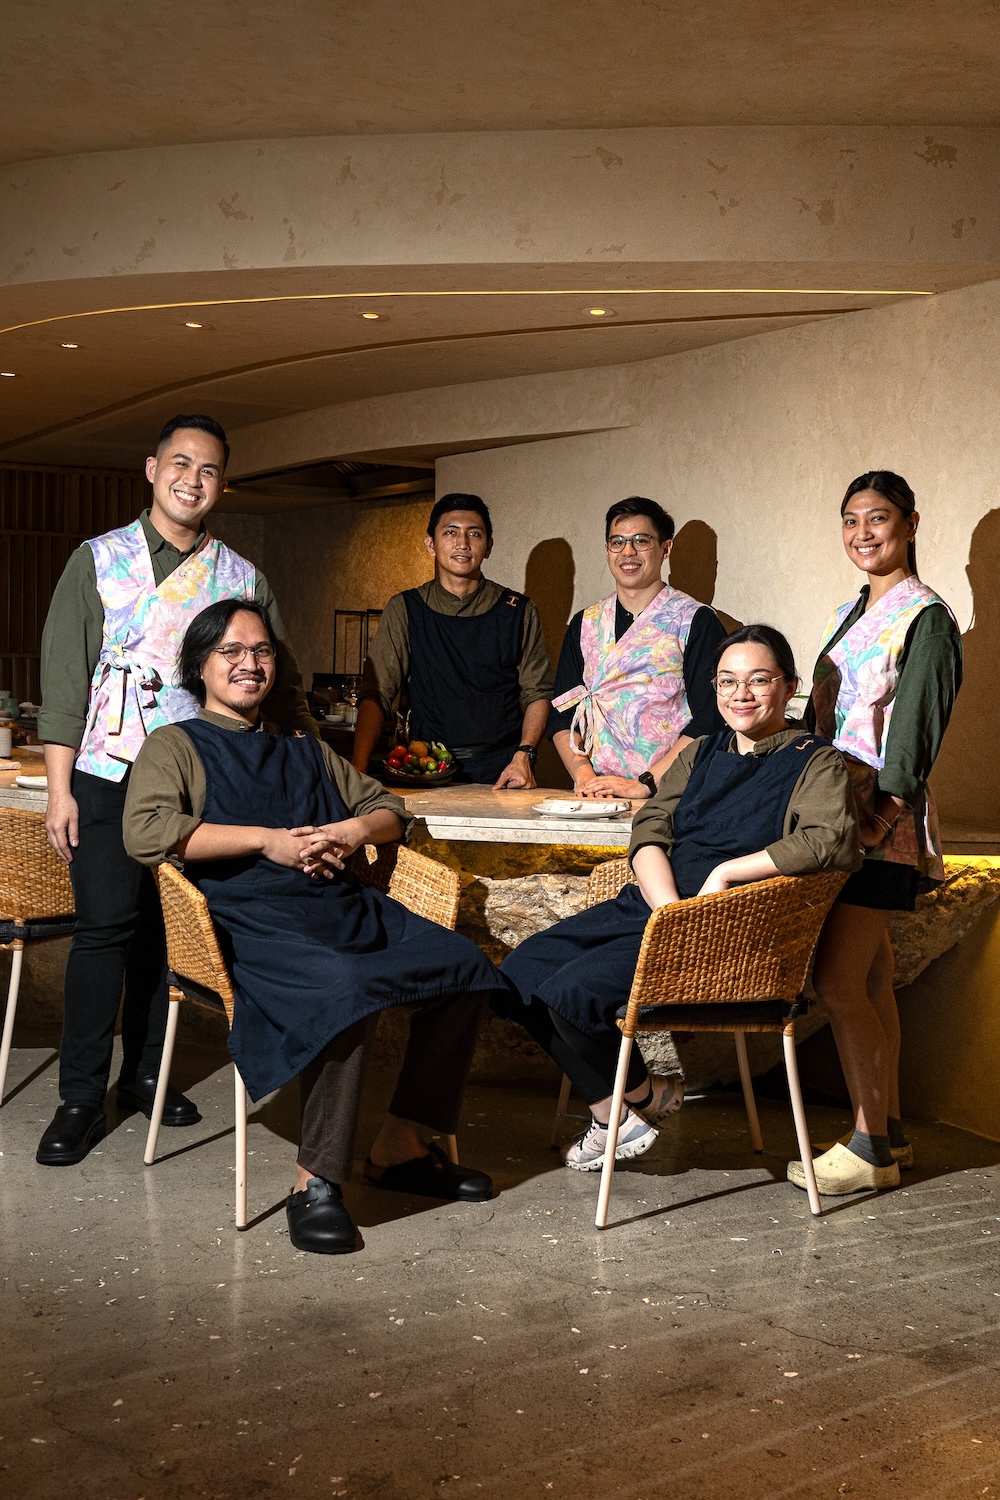 The Inatô team: (standing from left) Karlo Plata, Mark Soriano, Paulo Achacoso, and Liaa Roy; (seated) JP Cruz and Samantha Constantino